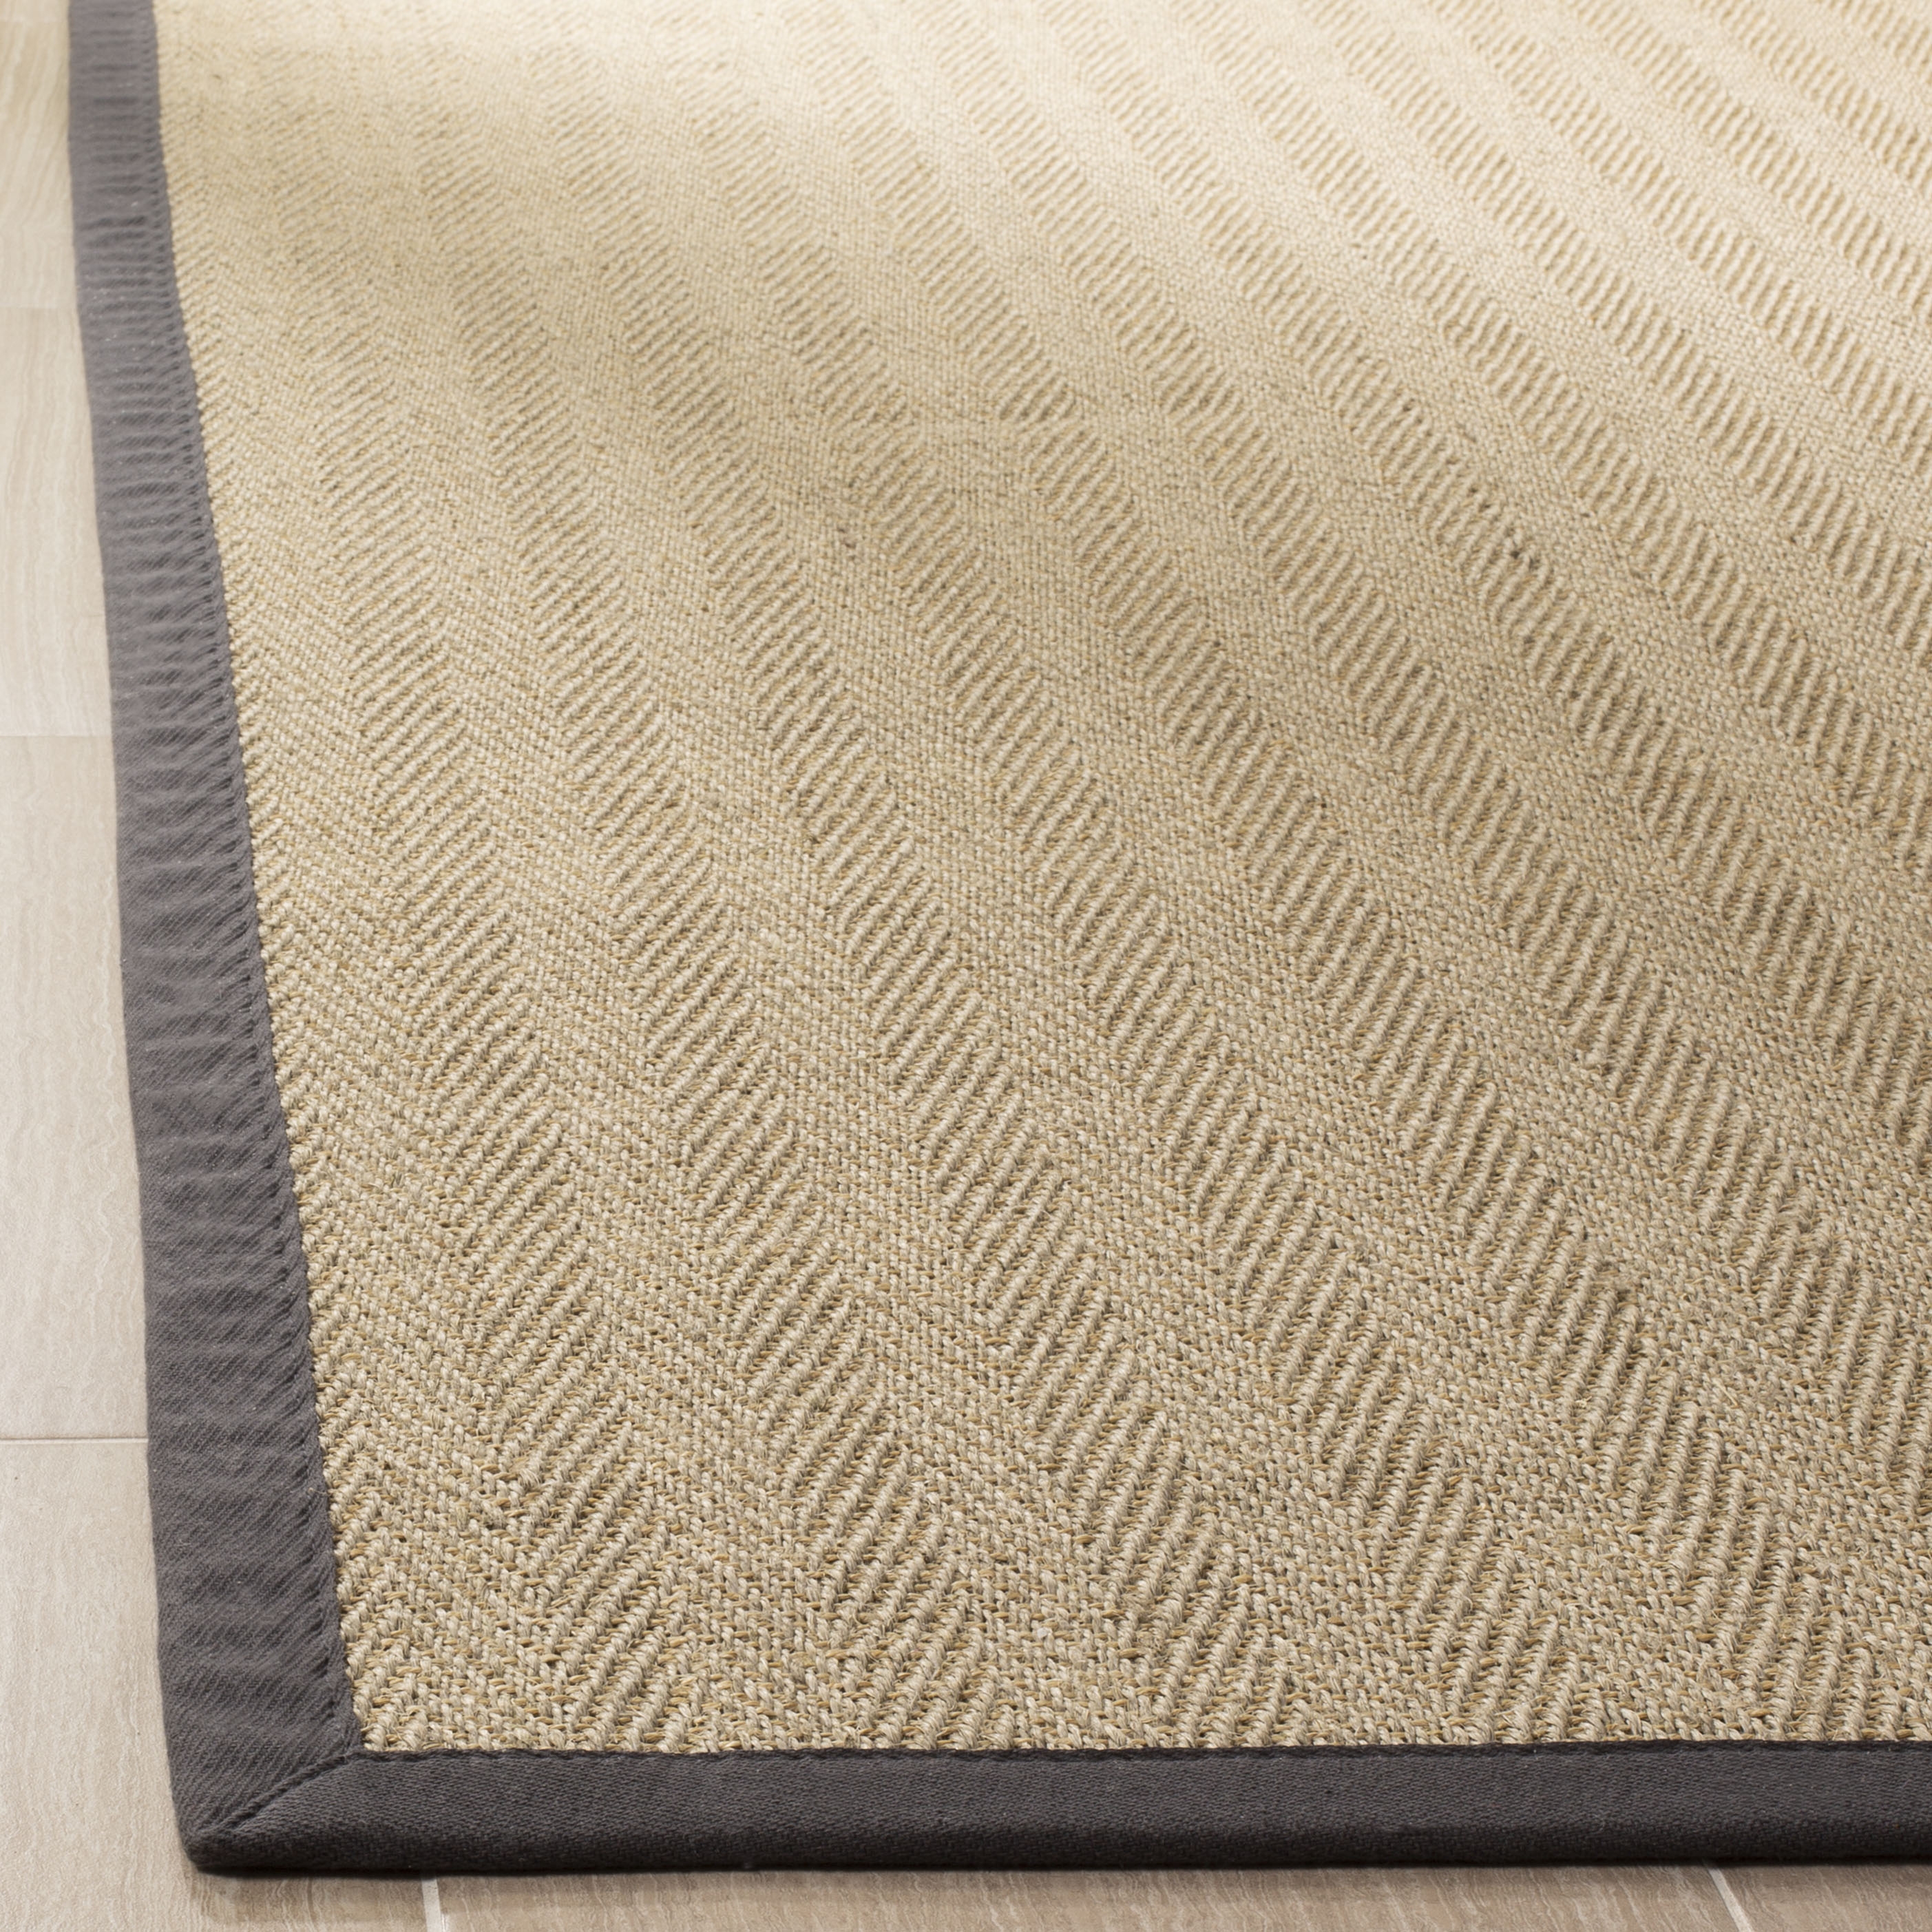 Arlo Home Woven Area Rug, NF134A, Natural/Grey,  6' X 9' - Image 2